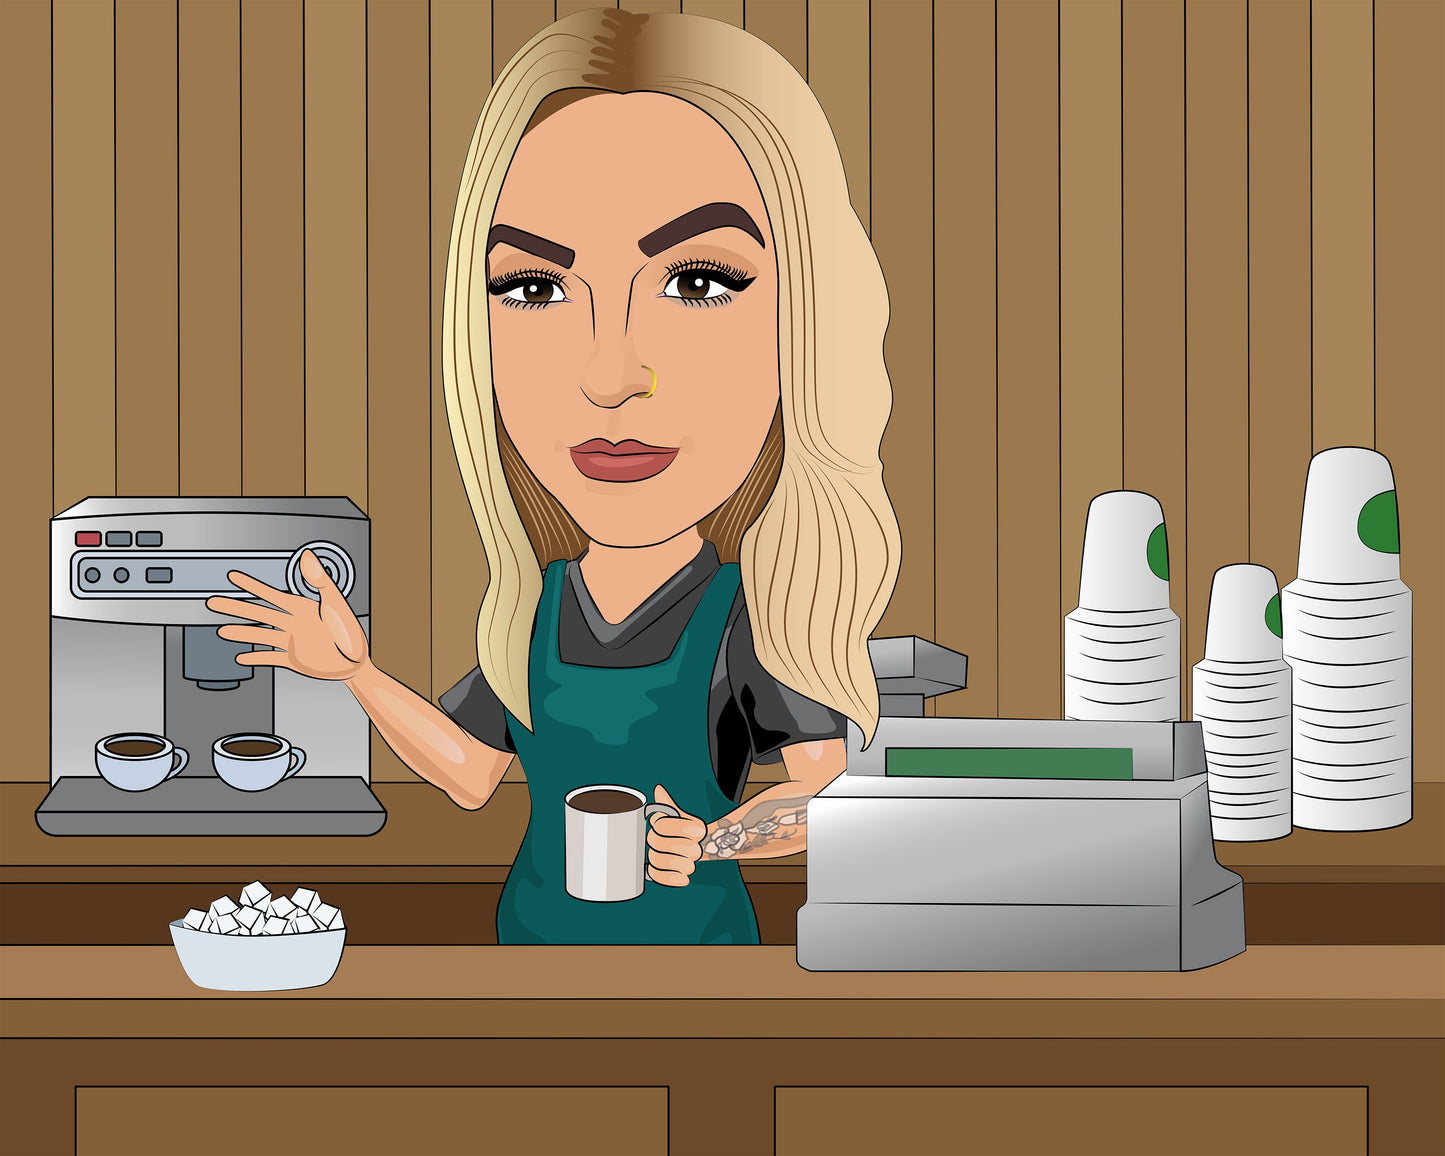 Barista Gift - Custom Caricature Portrait From Your Photo/gift for barista art